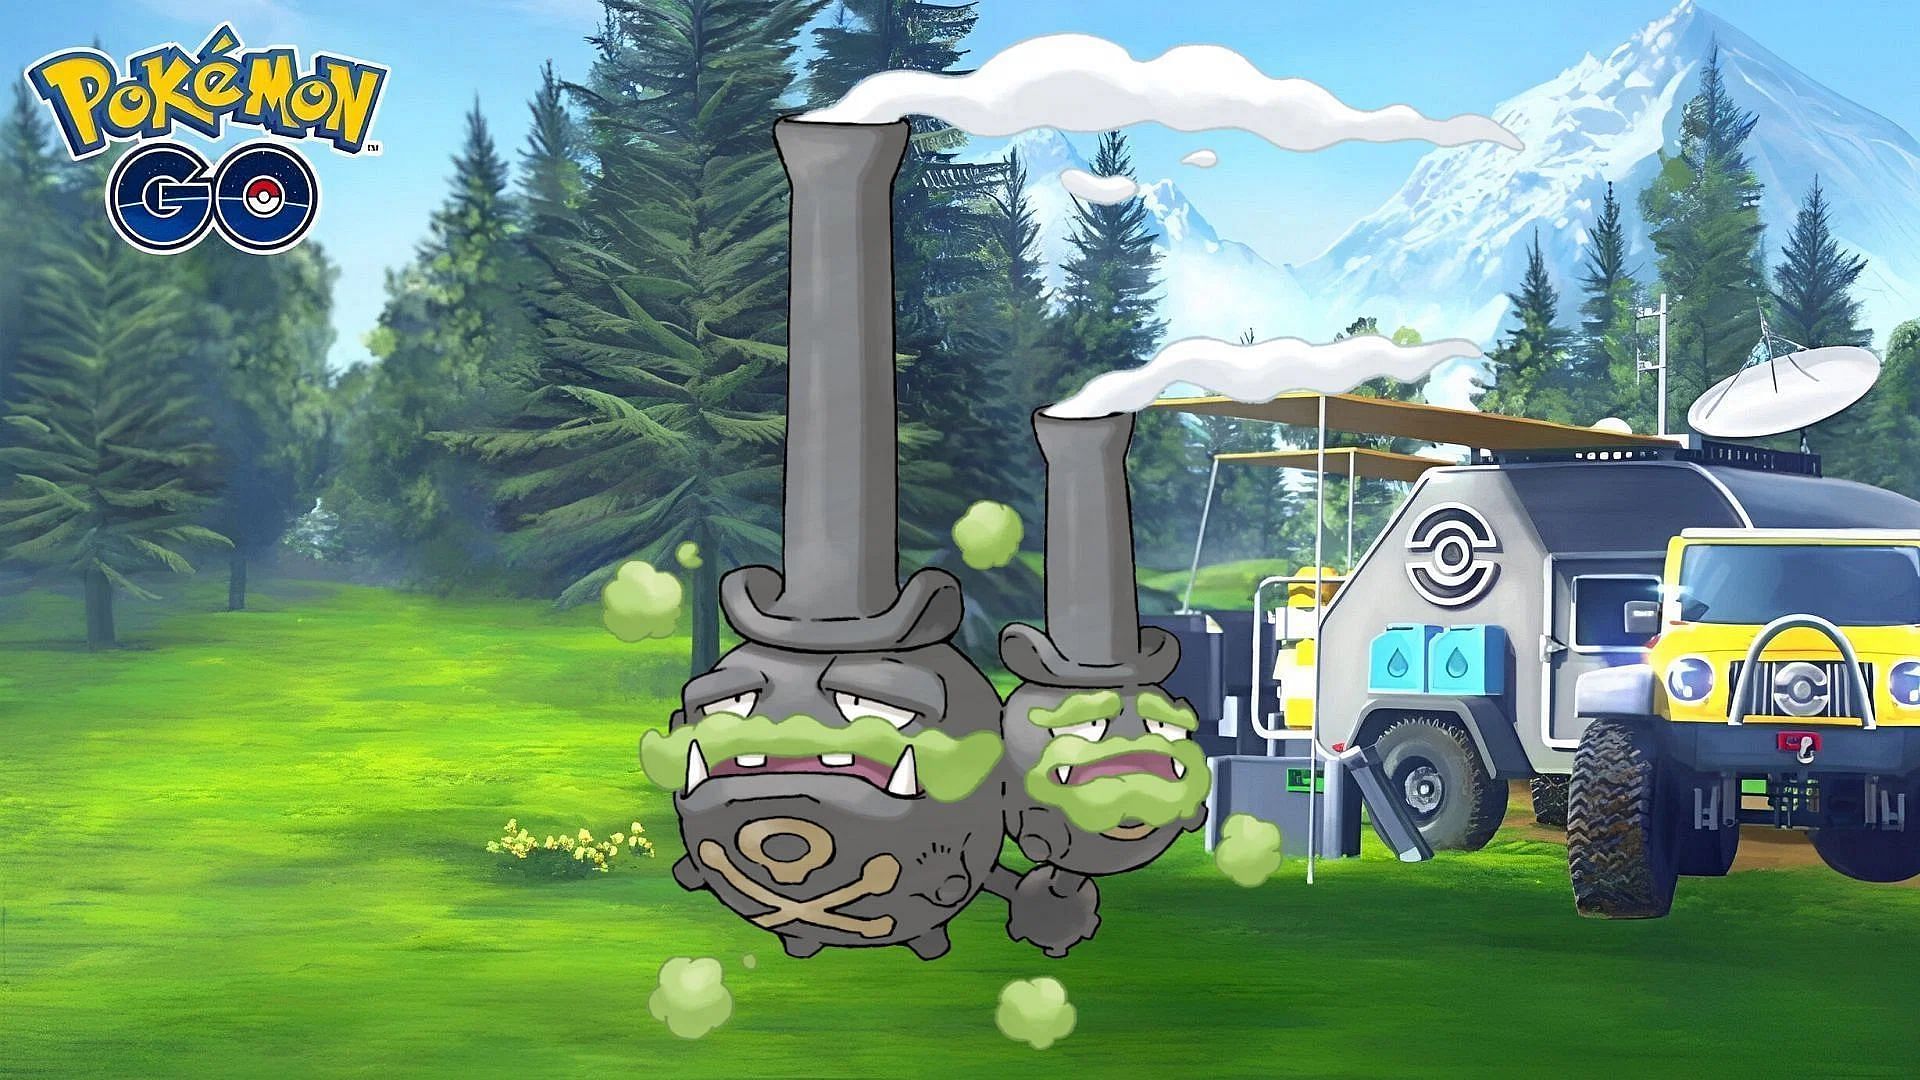 Solo defeat Galarian Weezing in Pokemon GO